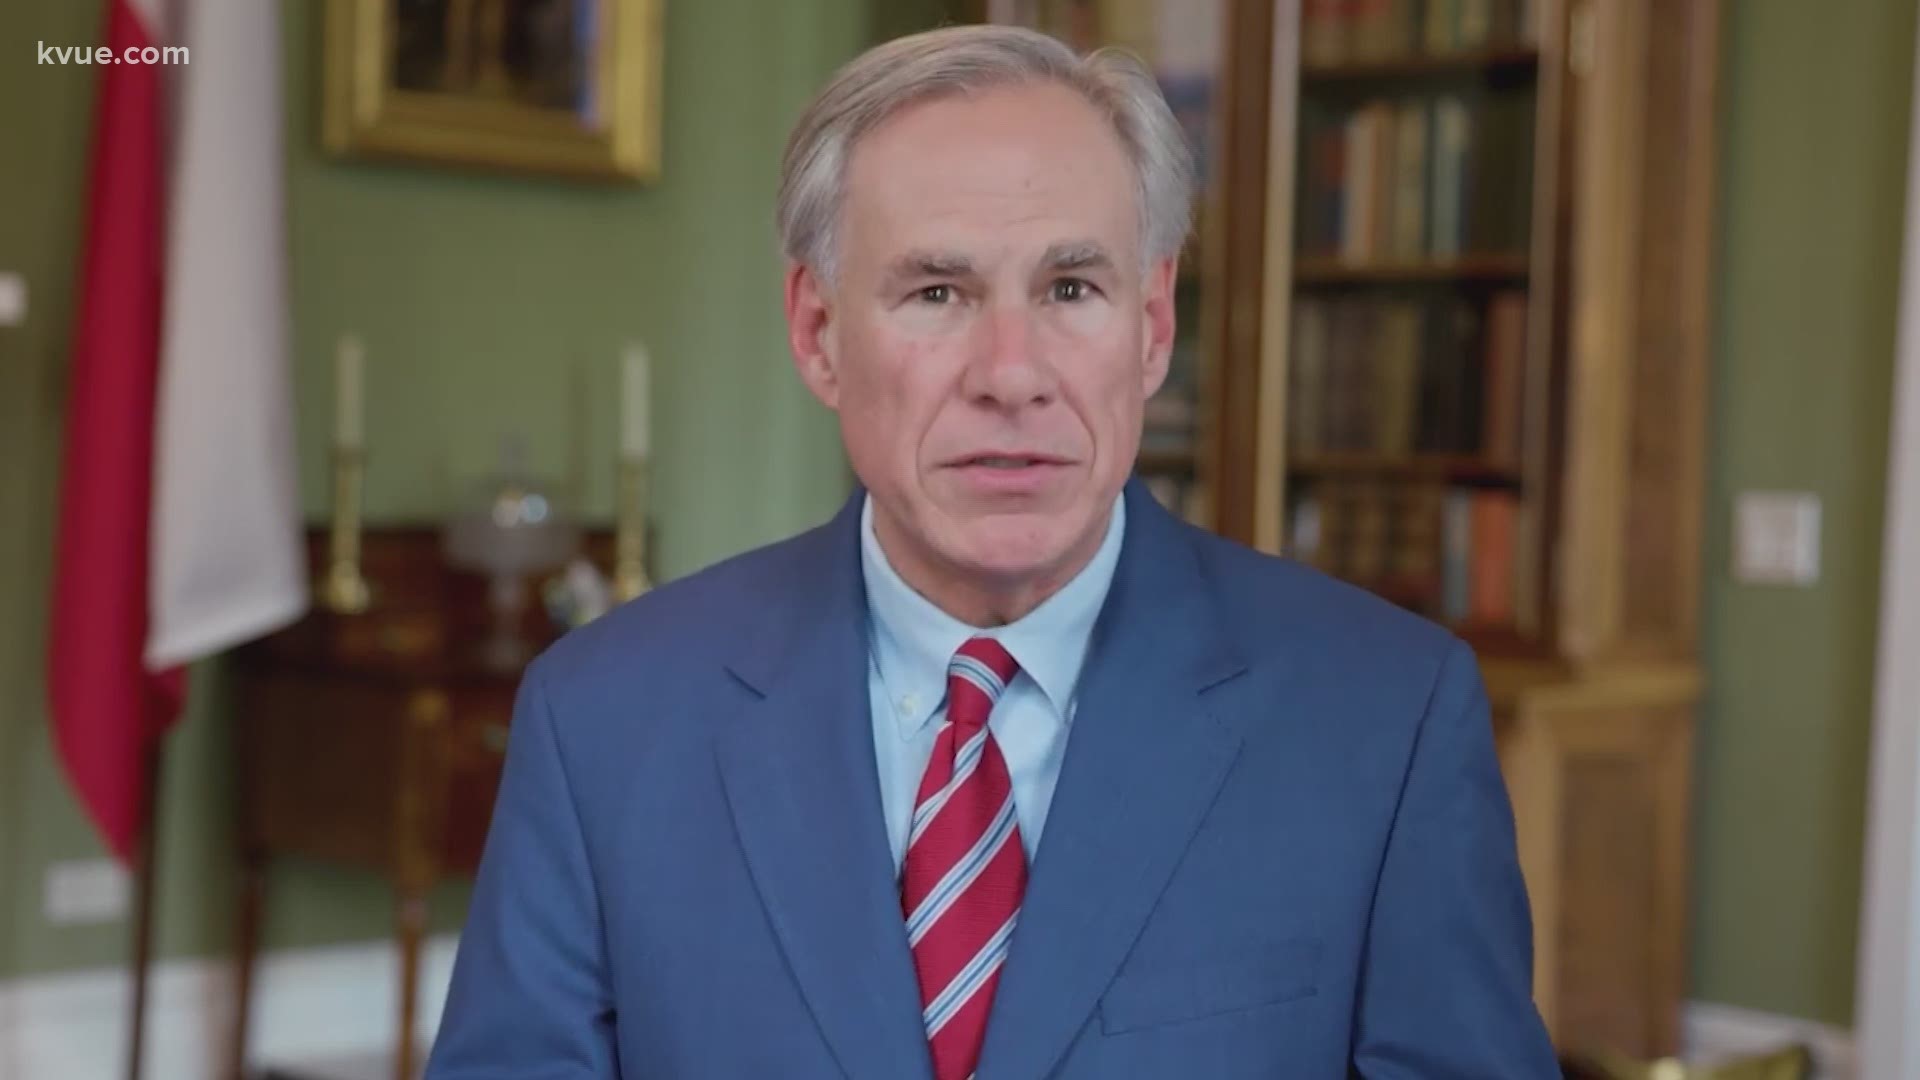 Gov. Greg Abbott signed an executive order banning government-mandated "vaccine passports" in Texas.